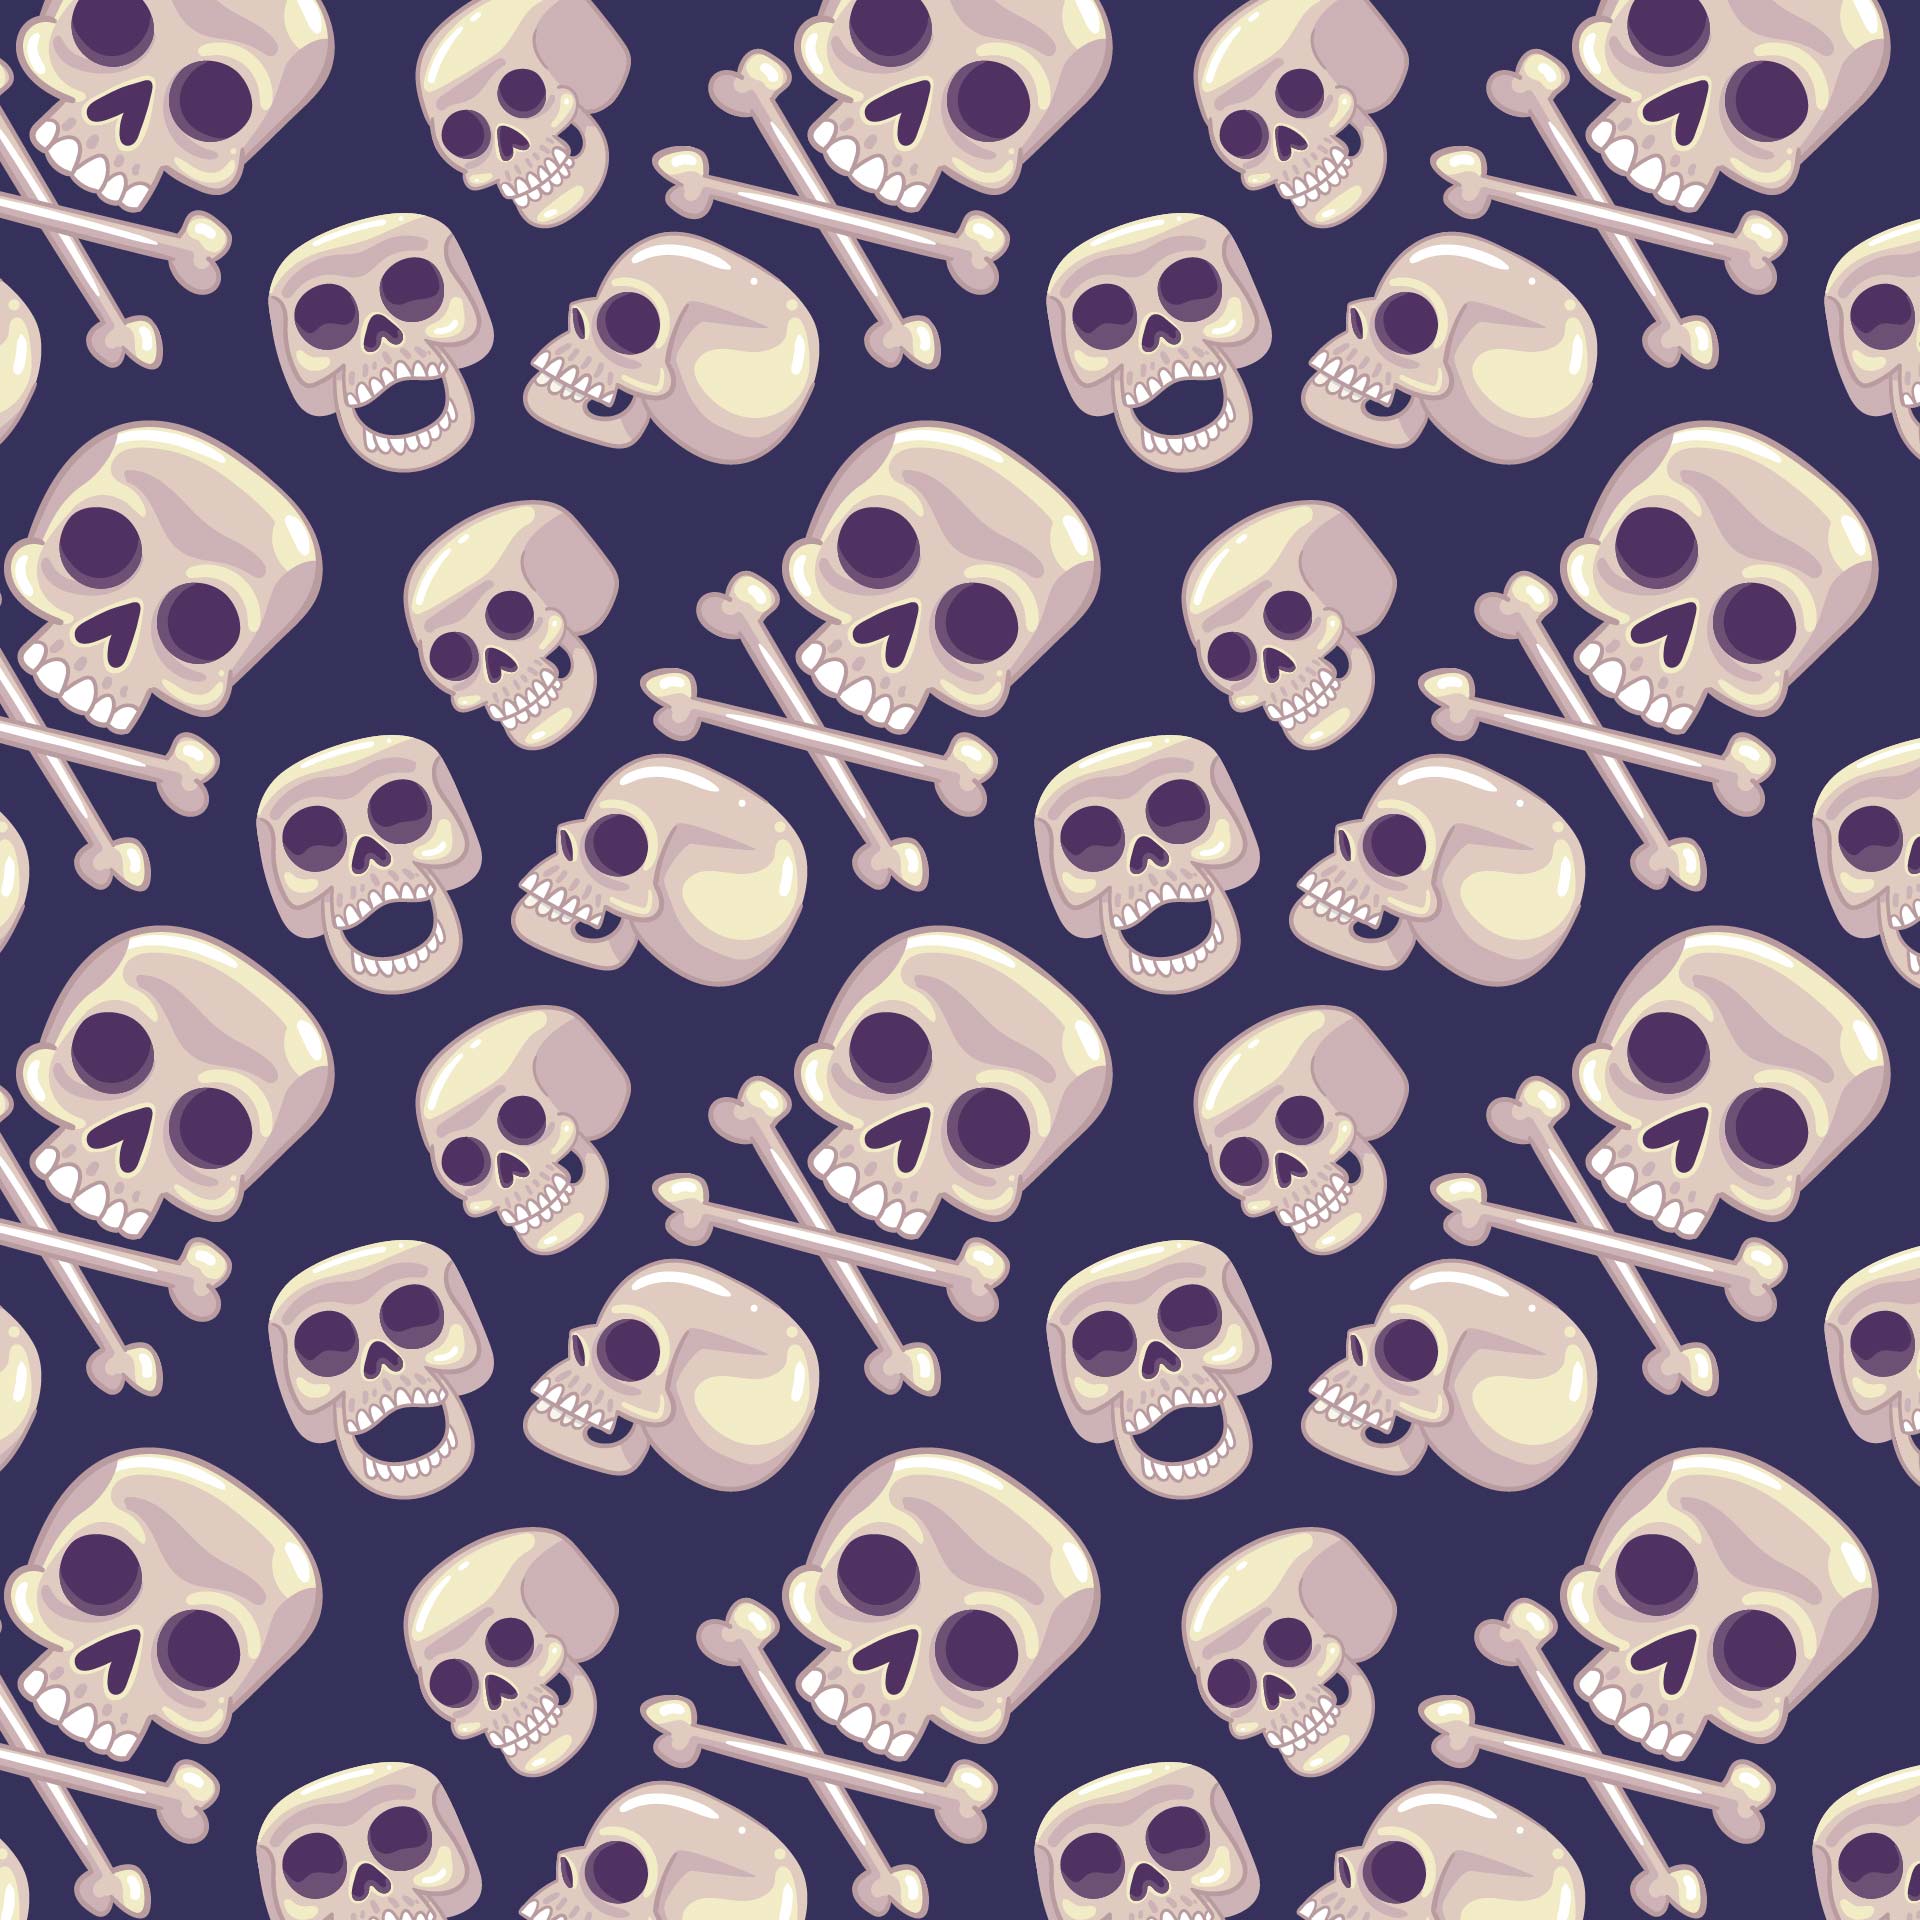 Printable Skull Scrapbooking And Wrapping Papers